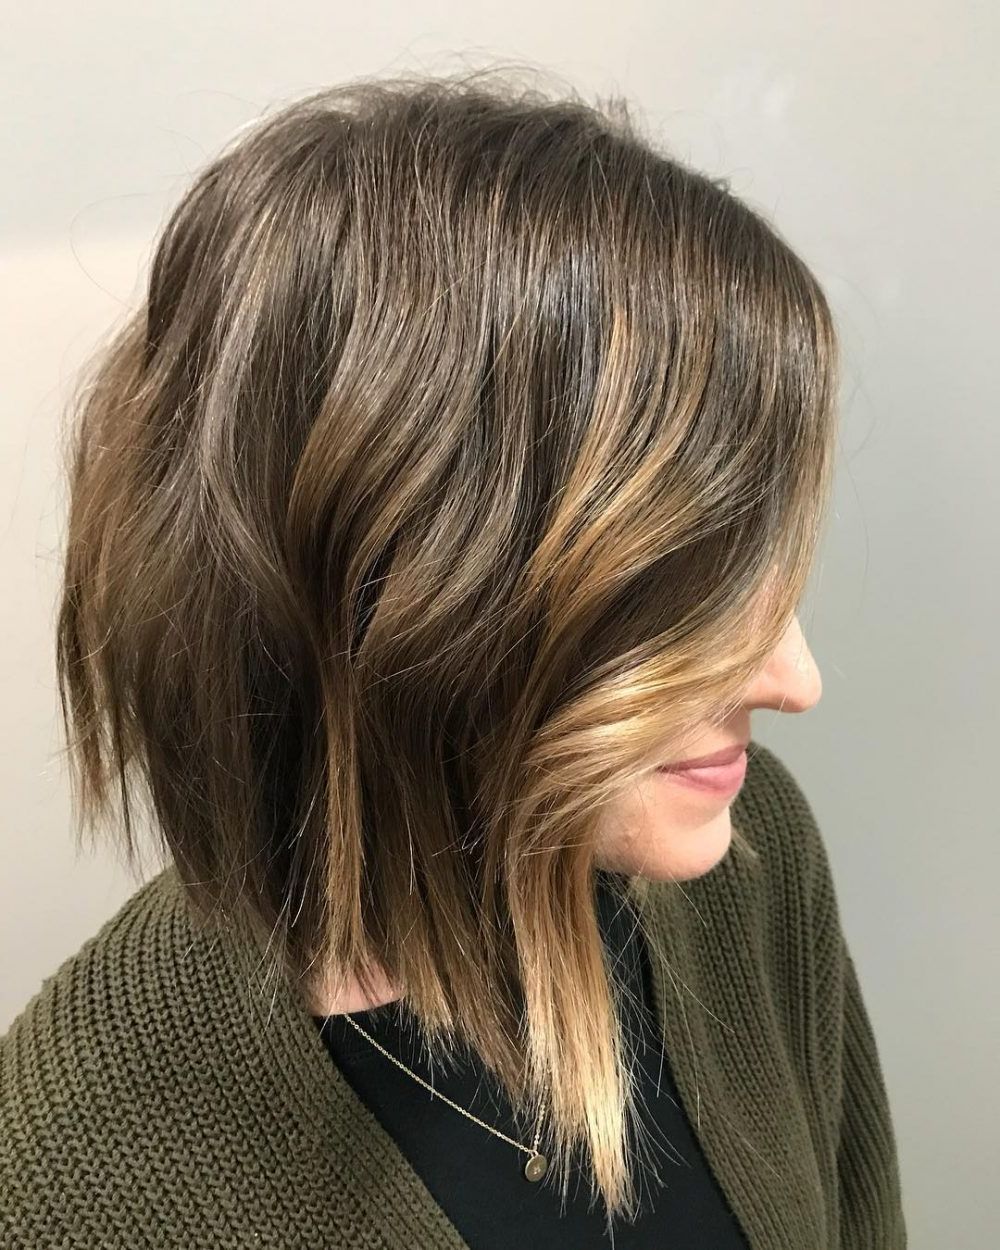 Newest Shaggy Bob Hairstyles With Choppy Layers Throughout 40 Cute Choppy Bob Hairstyles – 2020's Best Textured Bobs (Gallery 20 of 20)